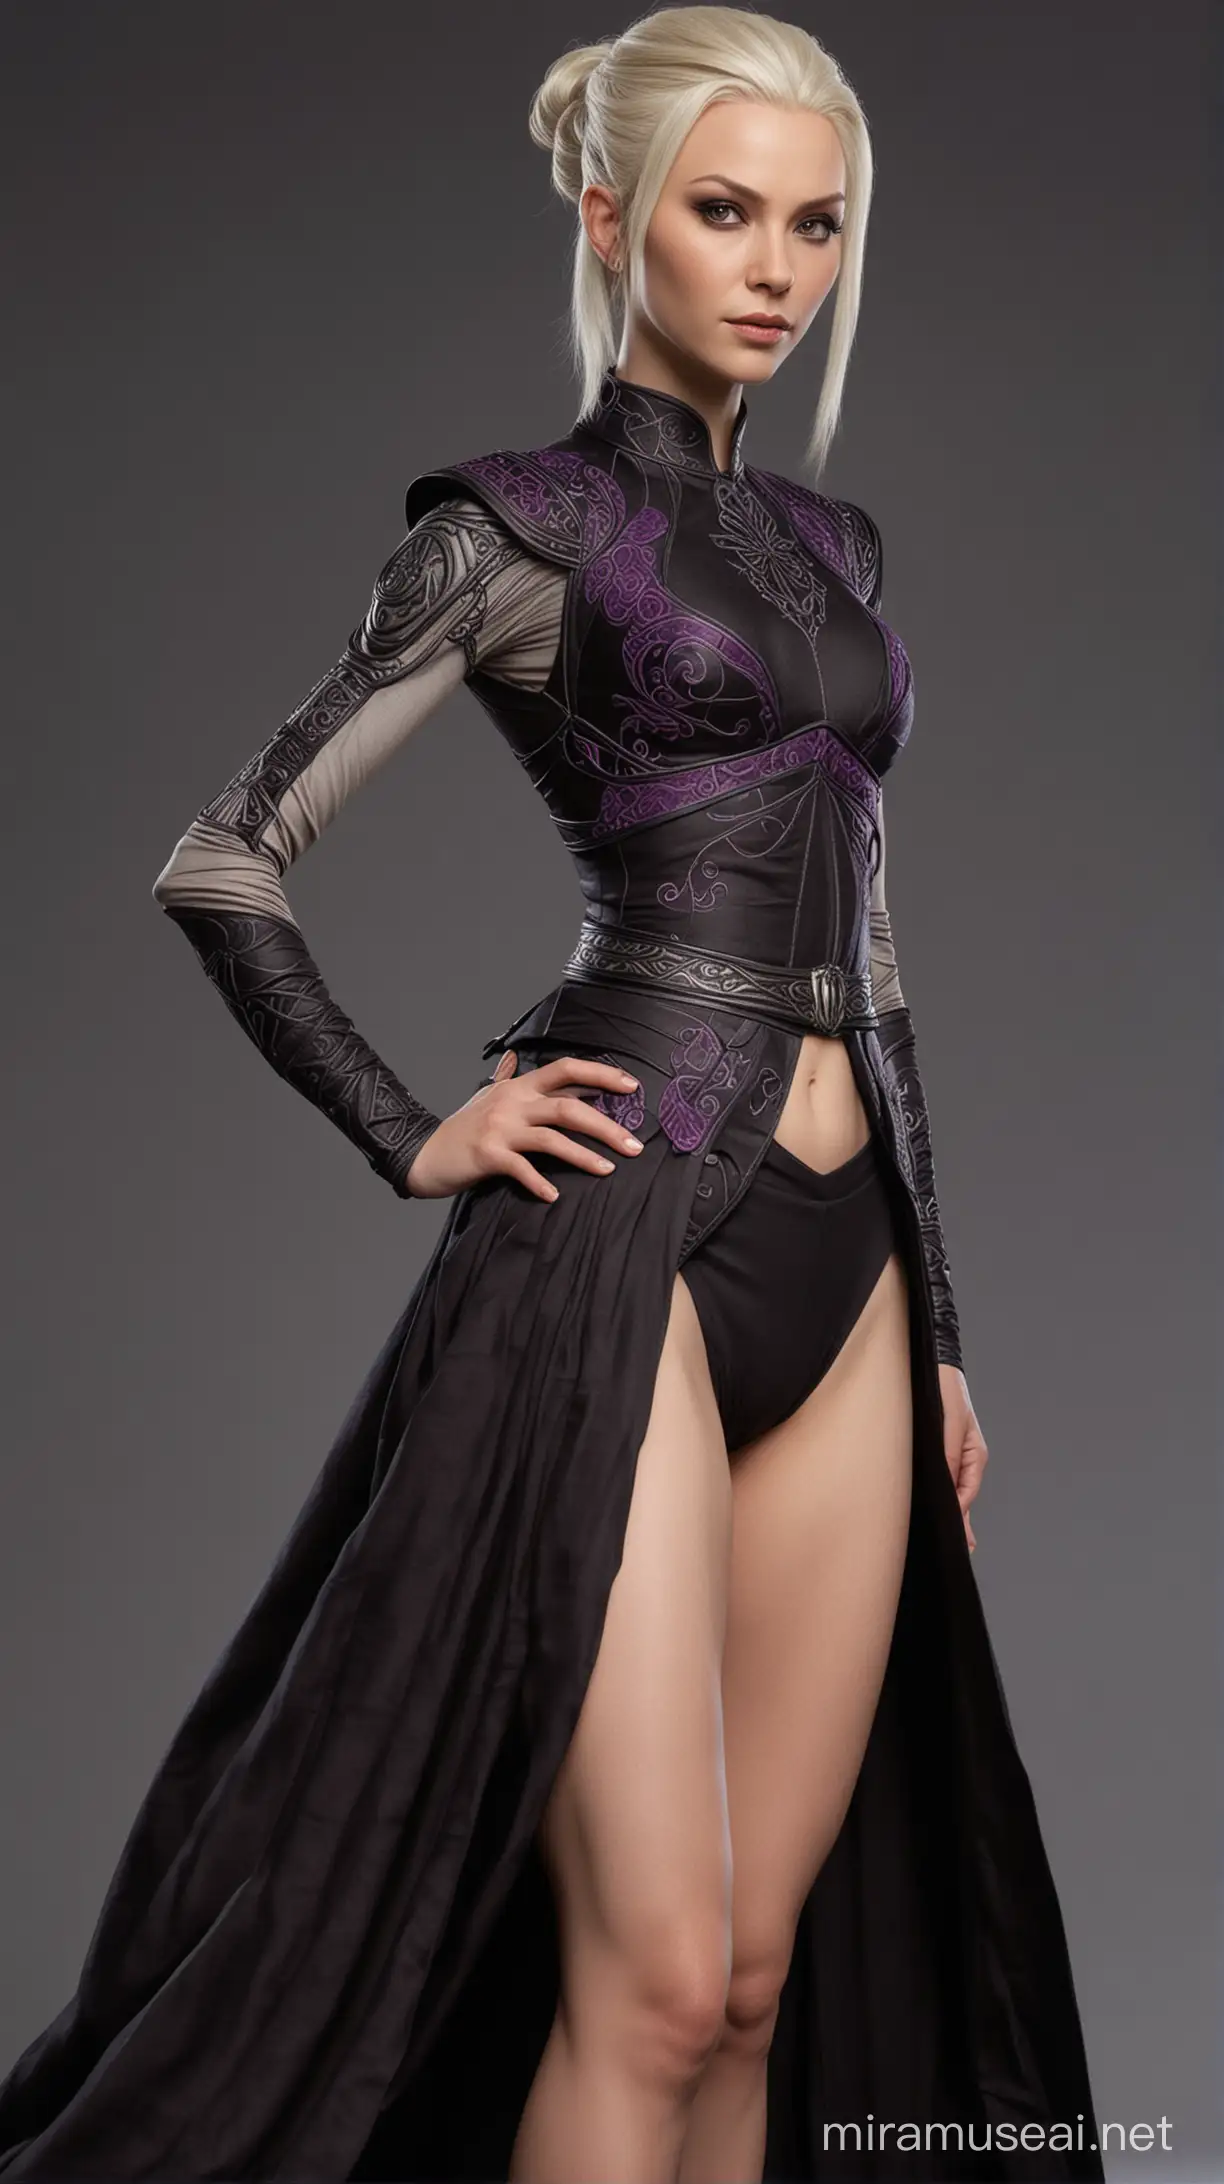 imagine A realistic photograph of Asajj Ventress with half-long blond hair wearing a two-piece, sleeveless bodice of rich ebony-hued fabric, with hints of a subtle swirling pattern of dark-purple embroidery. The top section enclosing her breasts and reveals a small patch of her taut stomach. The bottom section flaring over her hips. A midnight-black skirt, slit in front and back, falling to the floor.